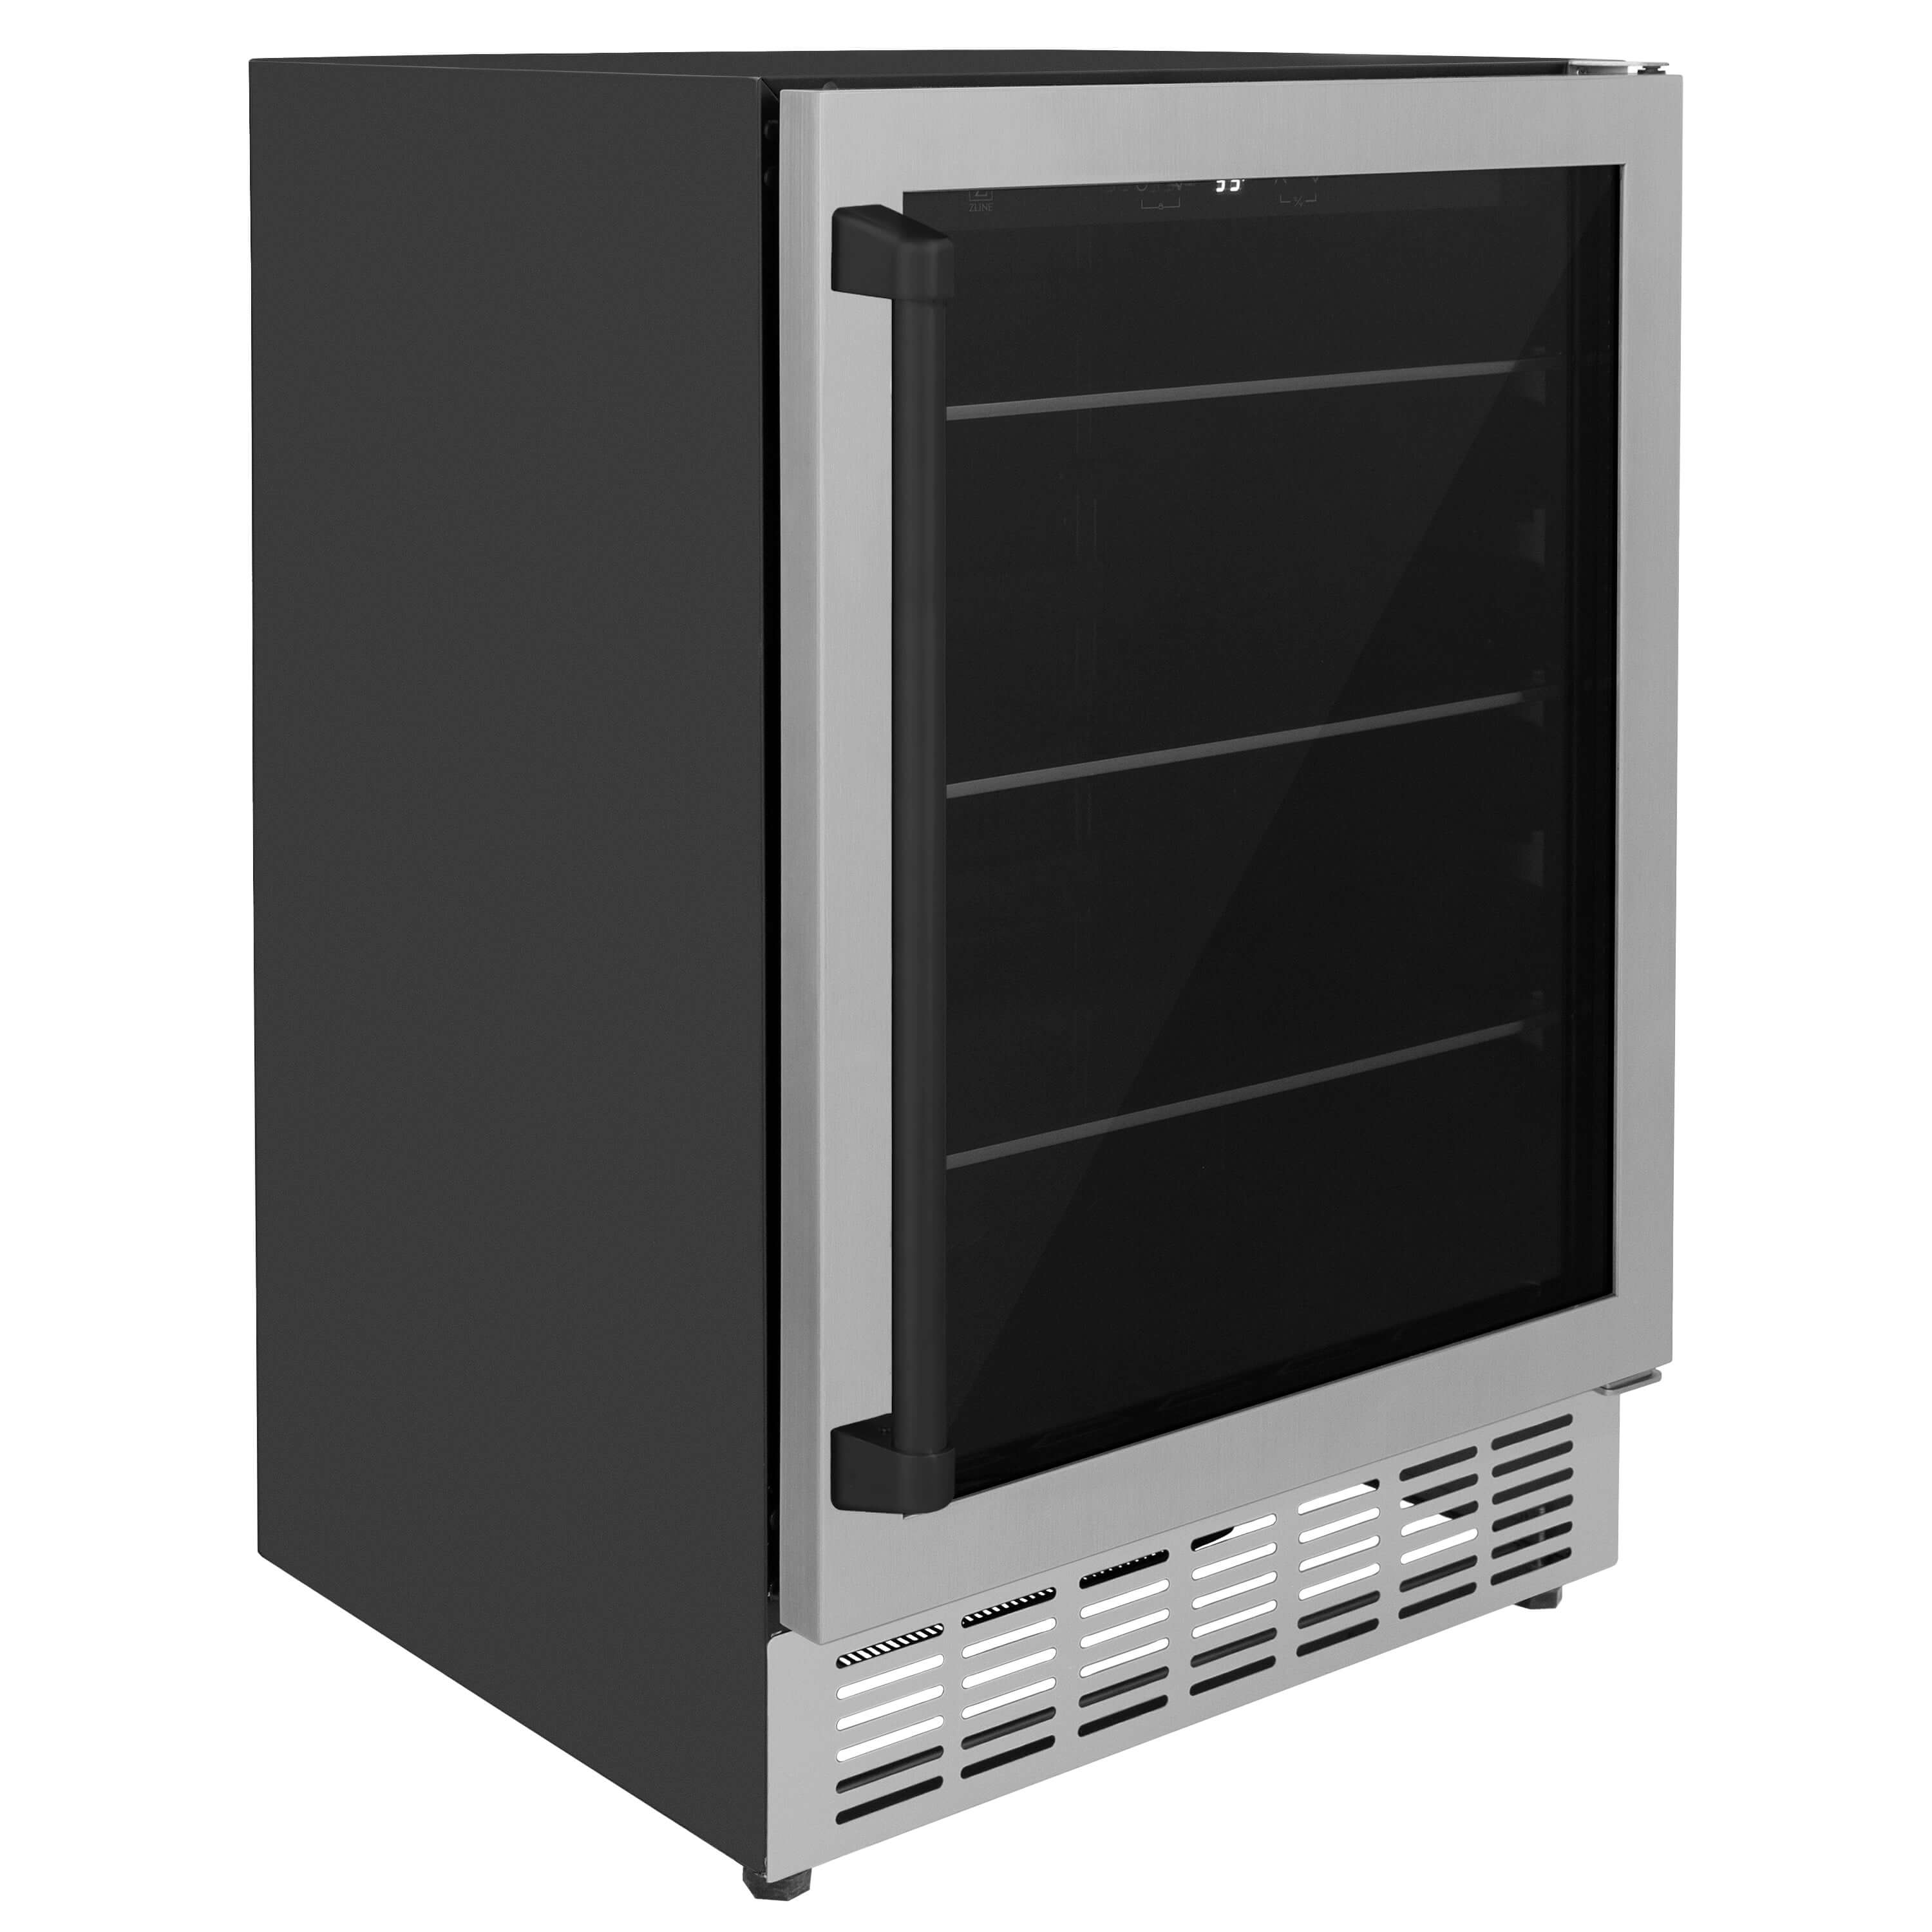 ZLINE Autograph Edition 24 in. Monument 154 Can Beverage Fridge in Stainless Steel with Matte Black Accents (RBVZ-US-24-MB) side, closed.